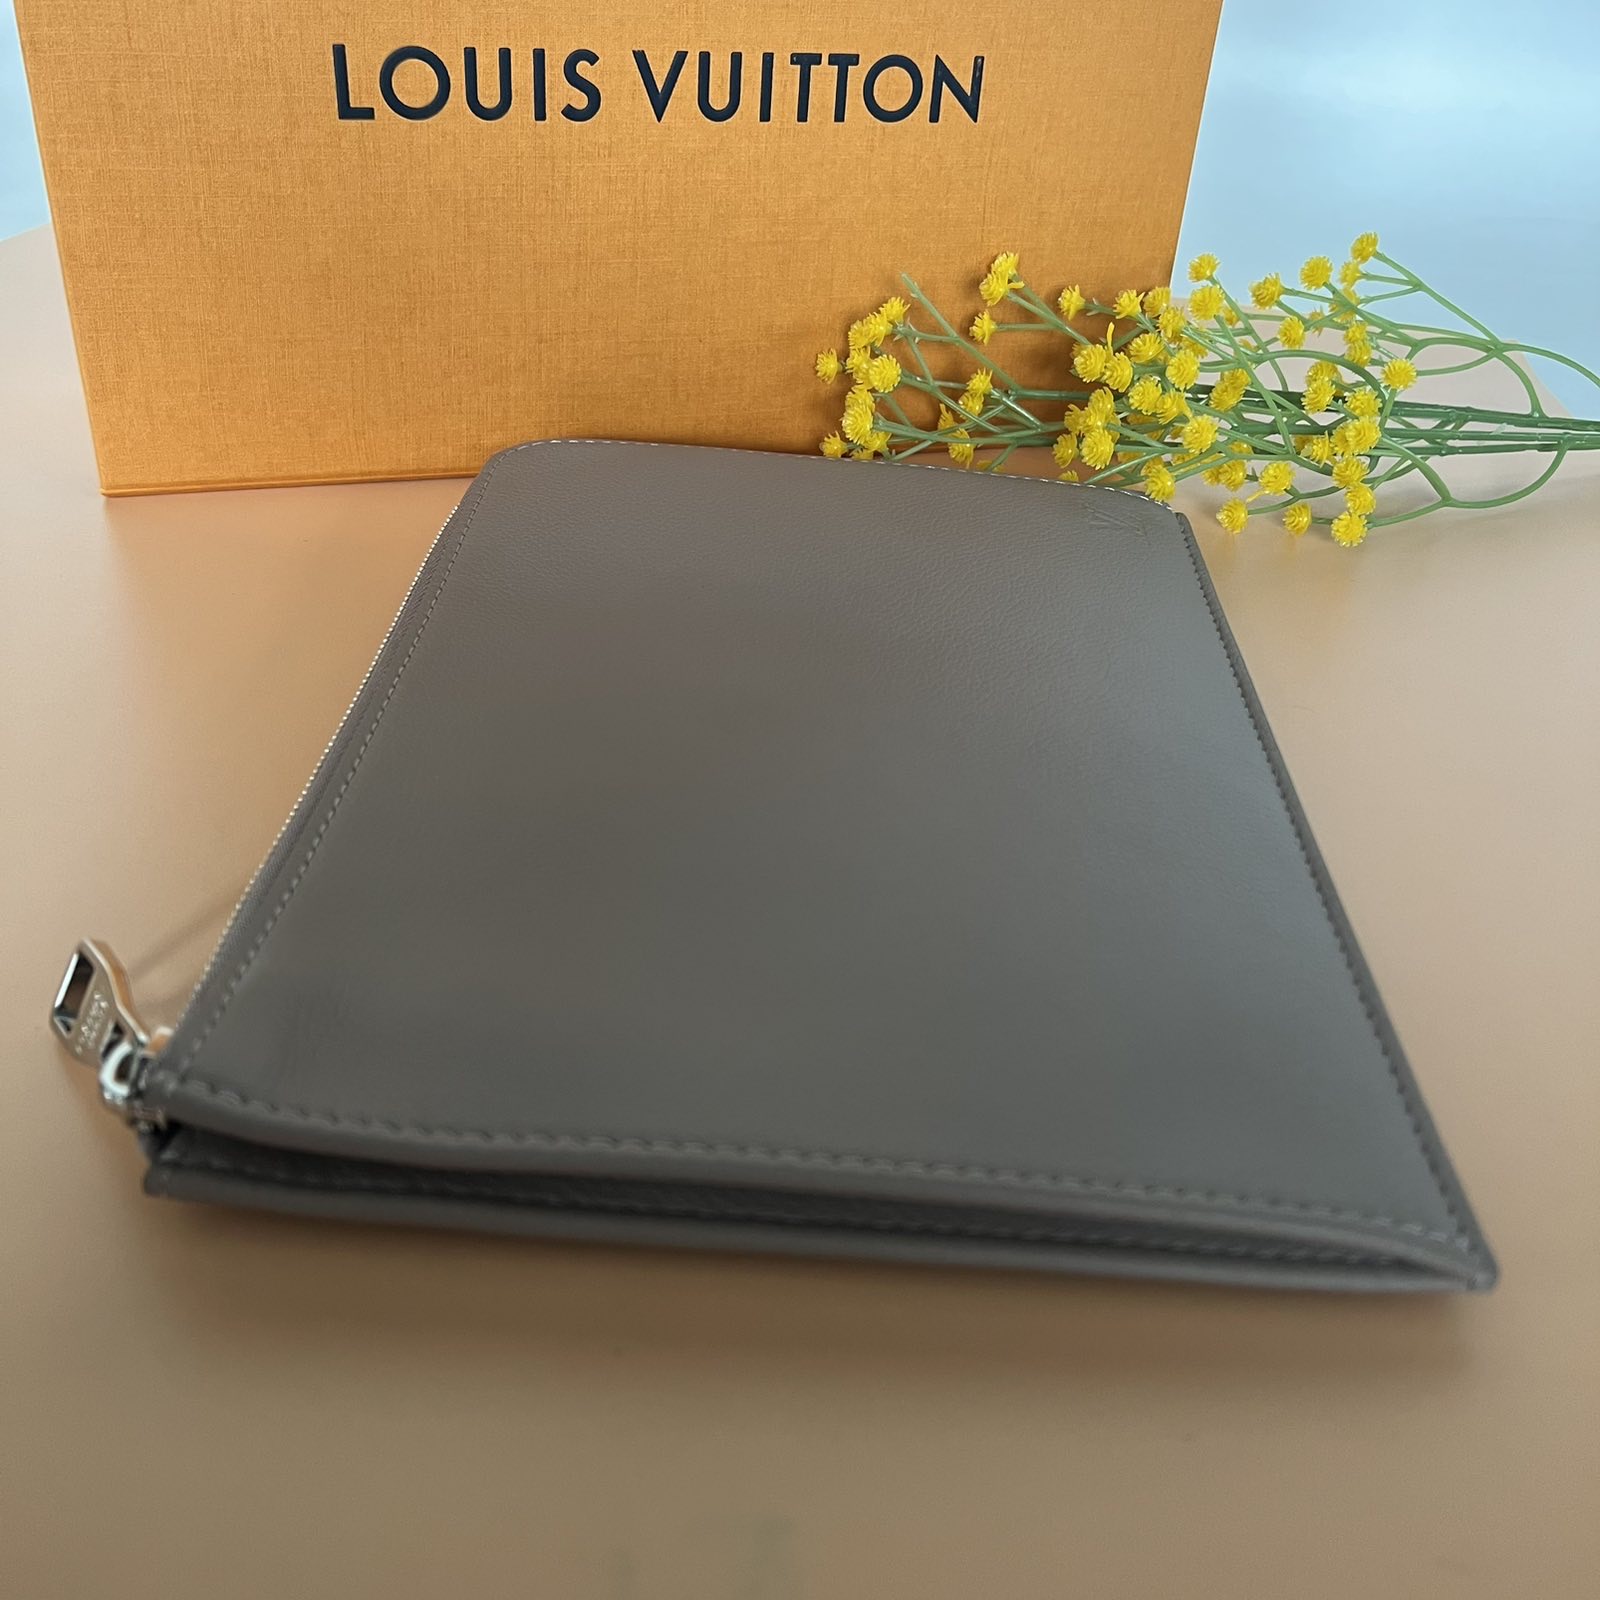 Louis Vuitton Taurillon Pochette Jour Taupe Clutch/Pouch Silver Hardware.  DC: TH4127. Made in Italy. With card & box ❤️